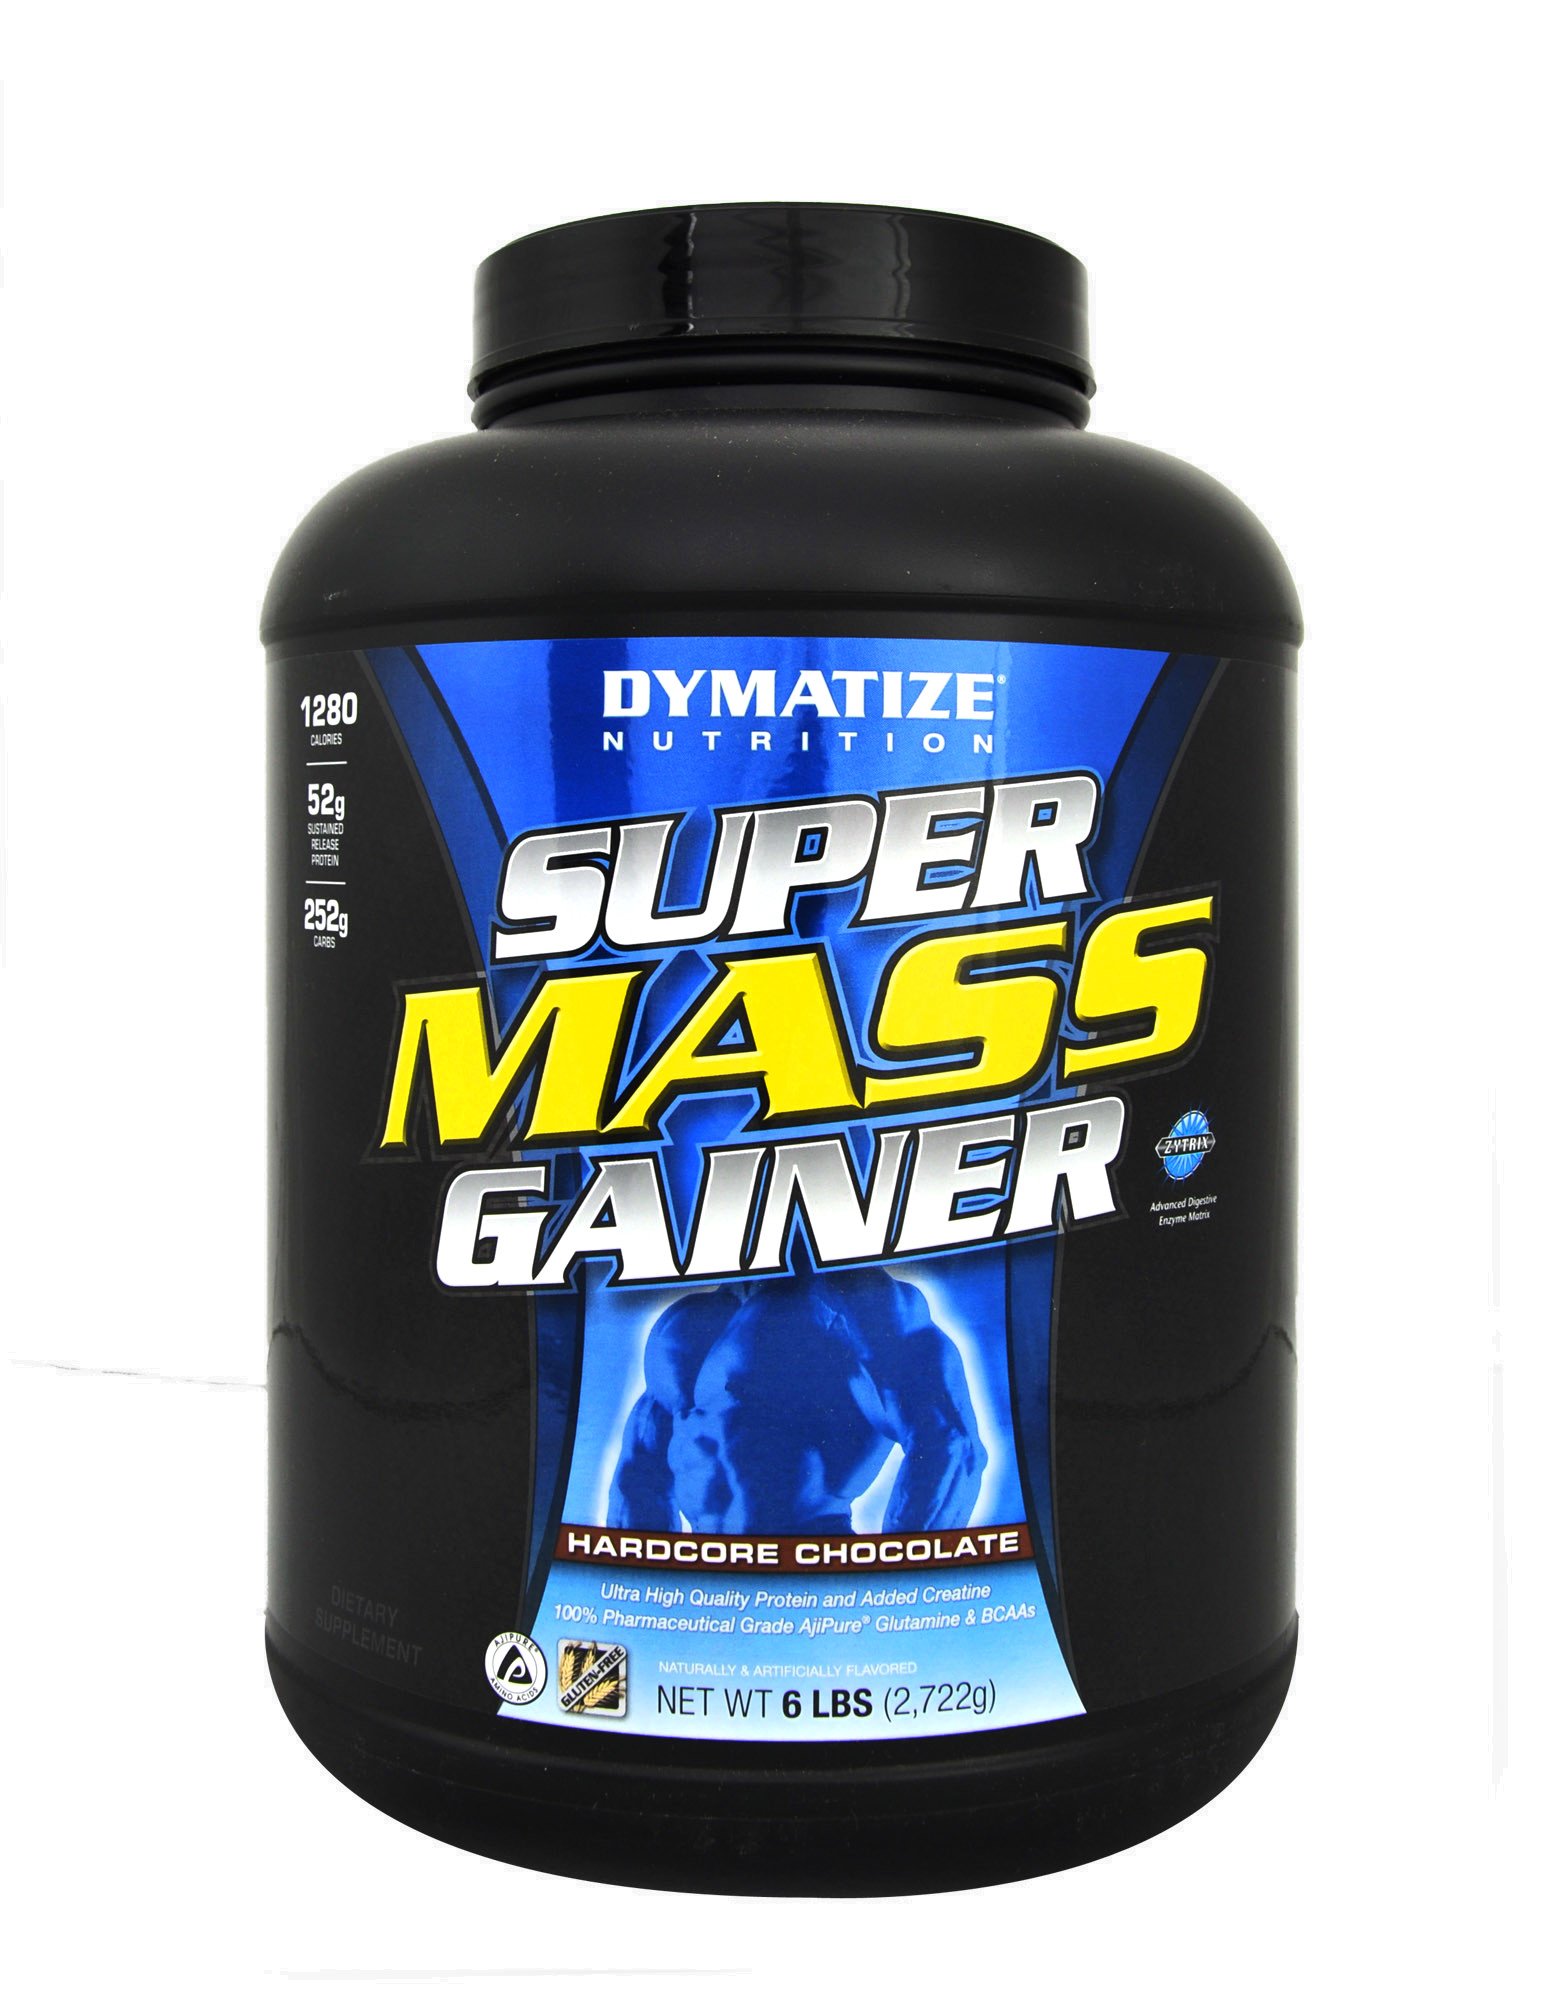 super-mass-gainer-by-dymatize-2700-grams